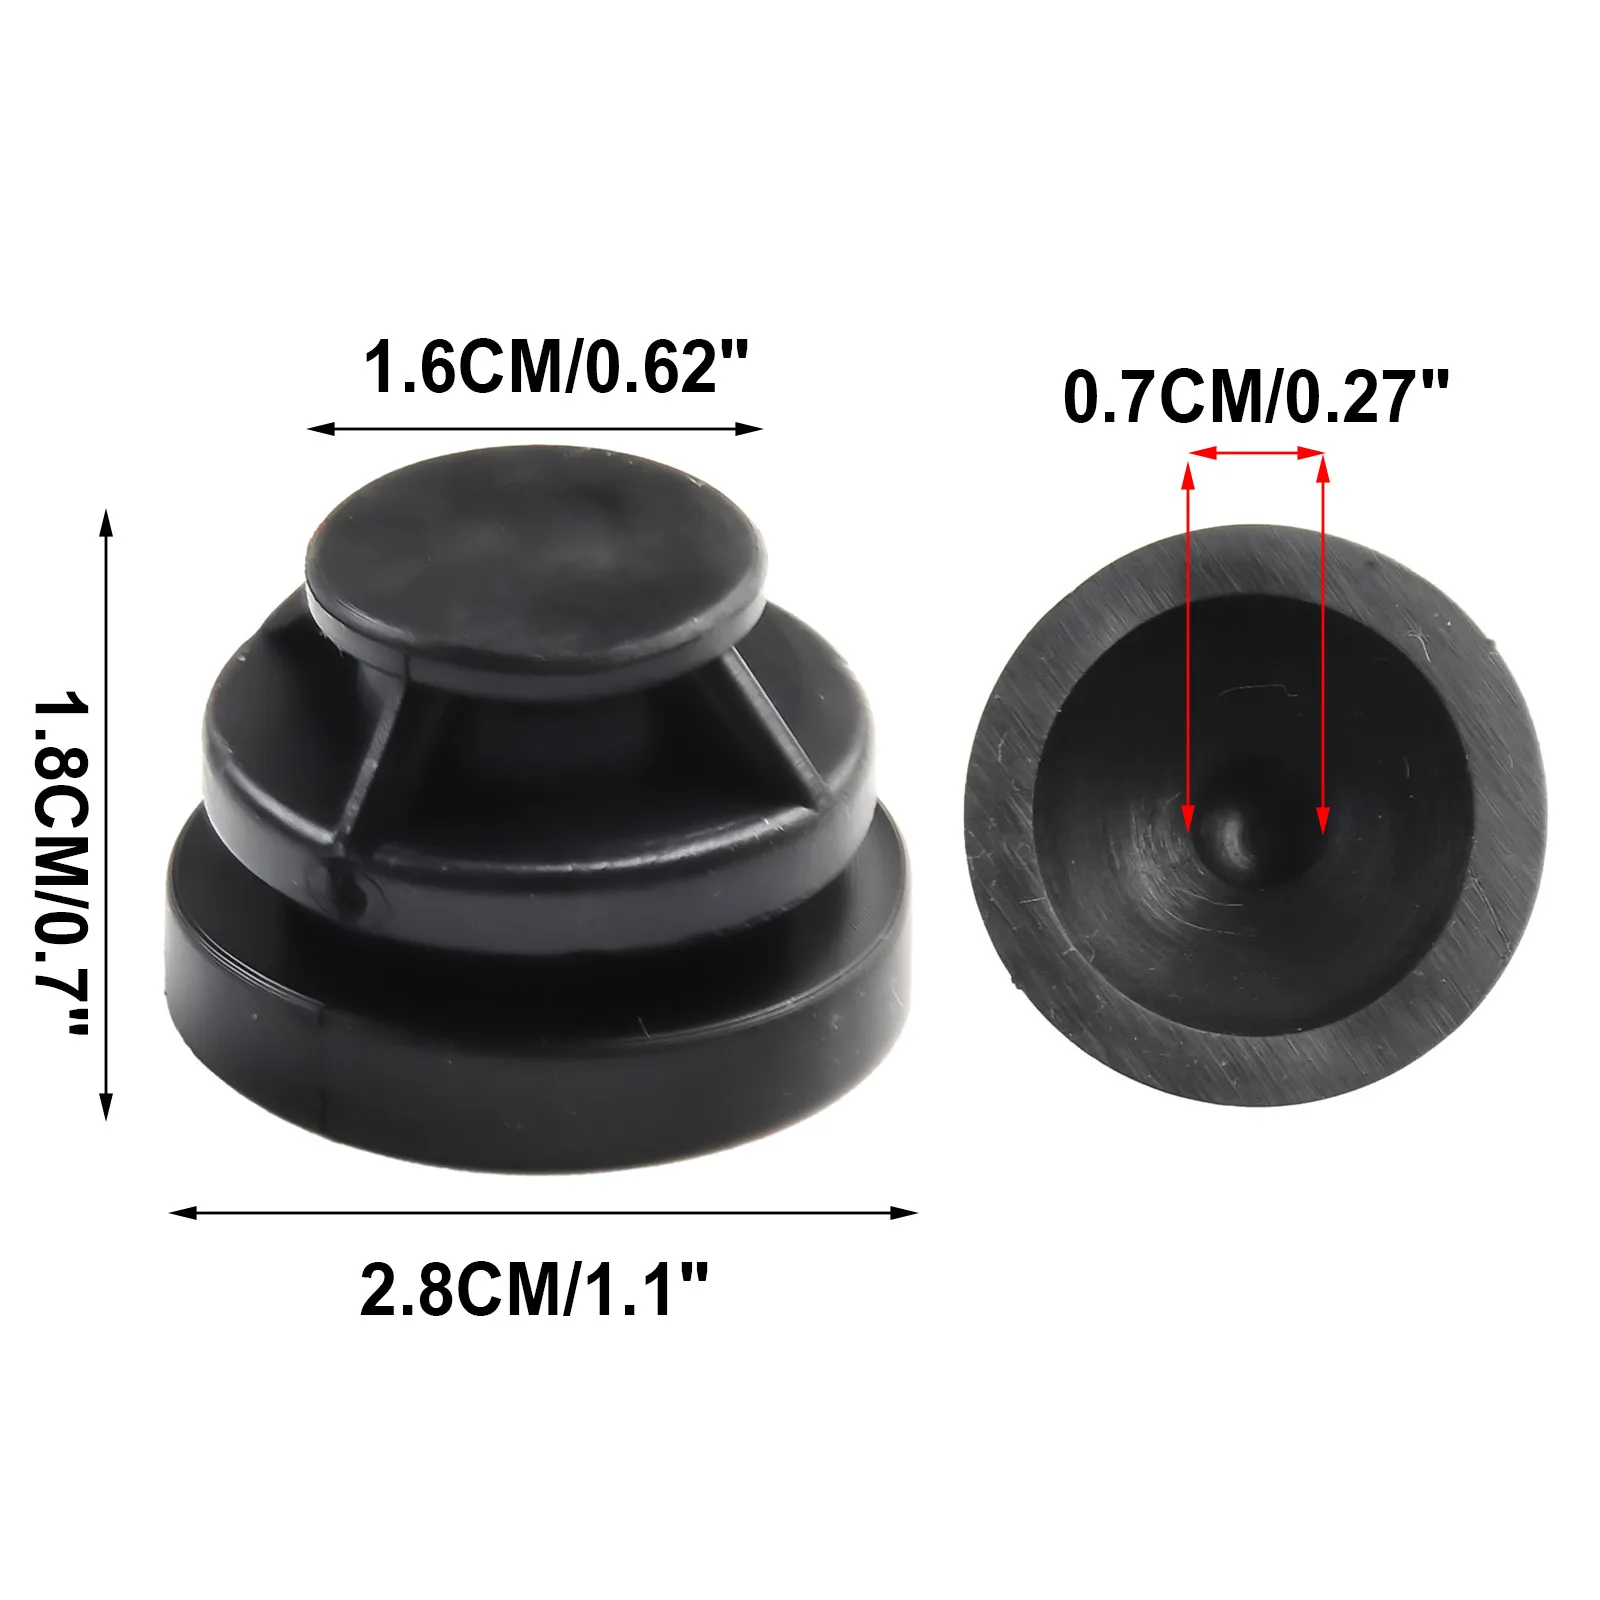 

Cover Car Engine Rubber Rubber Mounts Black Bush Buffer Car Accessories For Mazda 2 3 6 CX-3 CX-5 Practical To Use